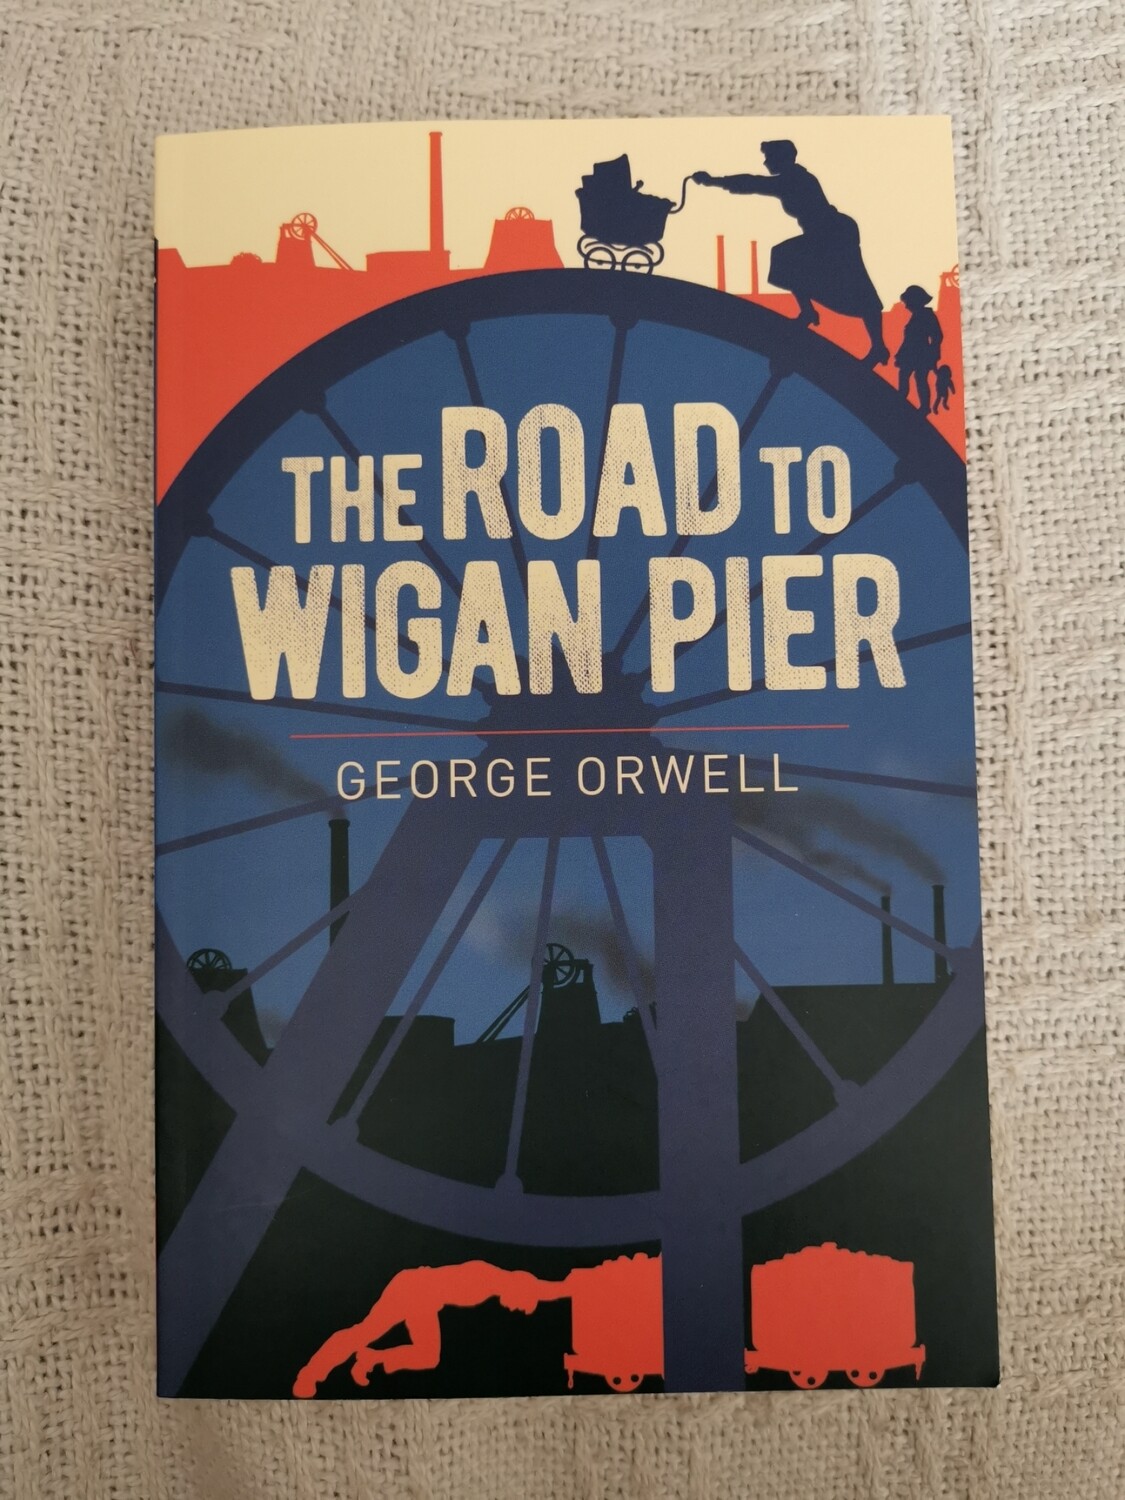 The road to Wigan pier, George Orwell